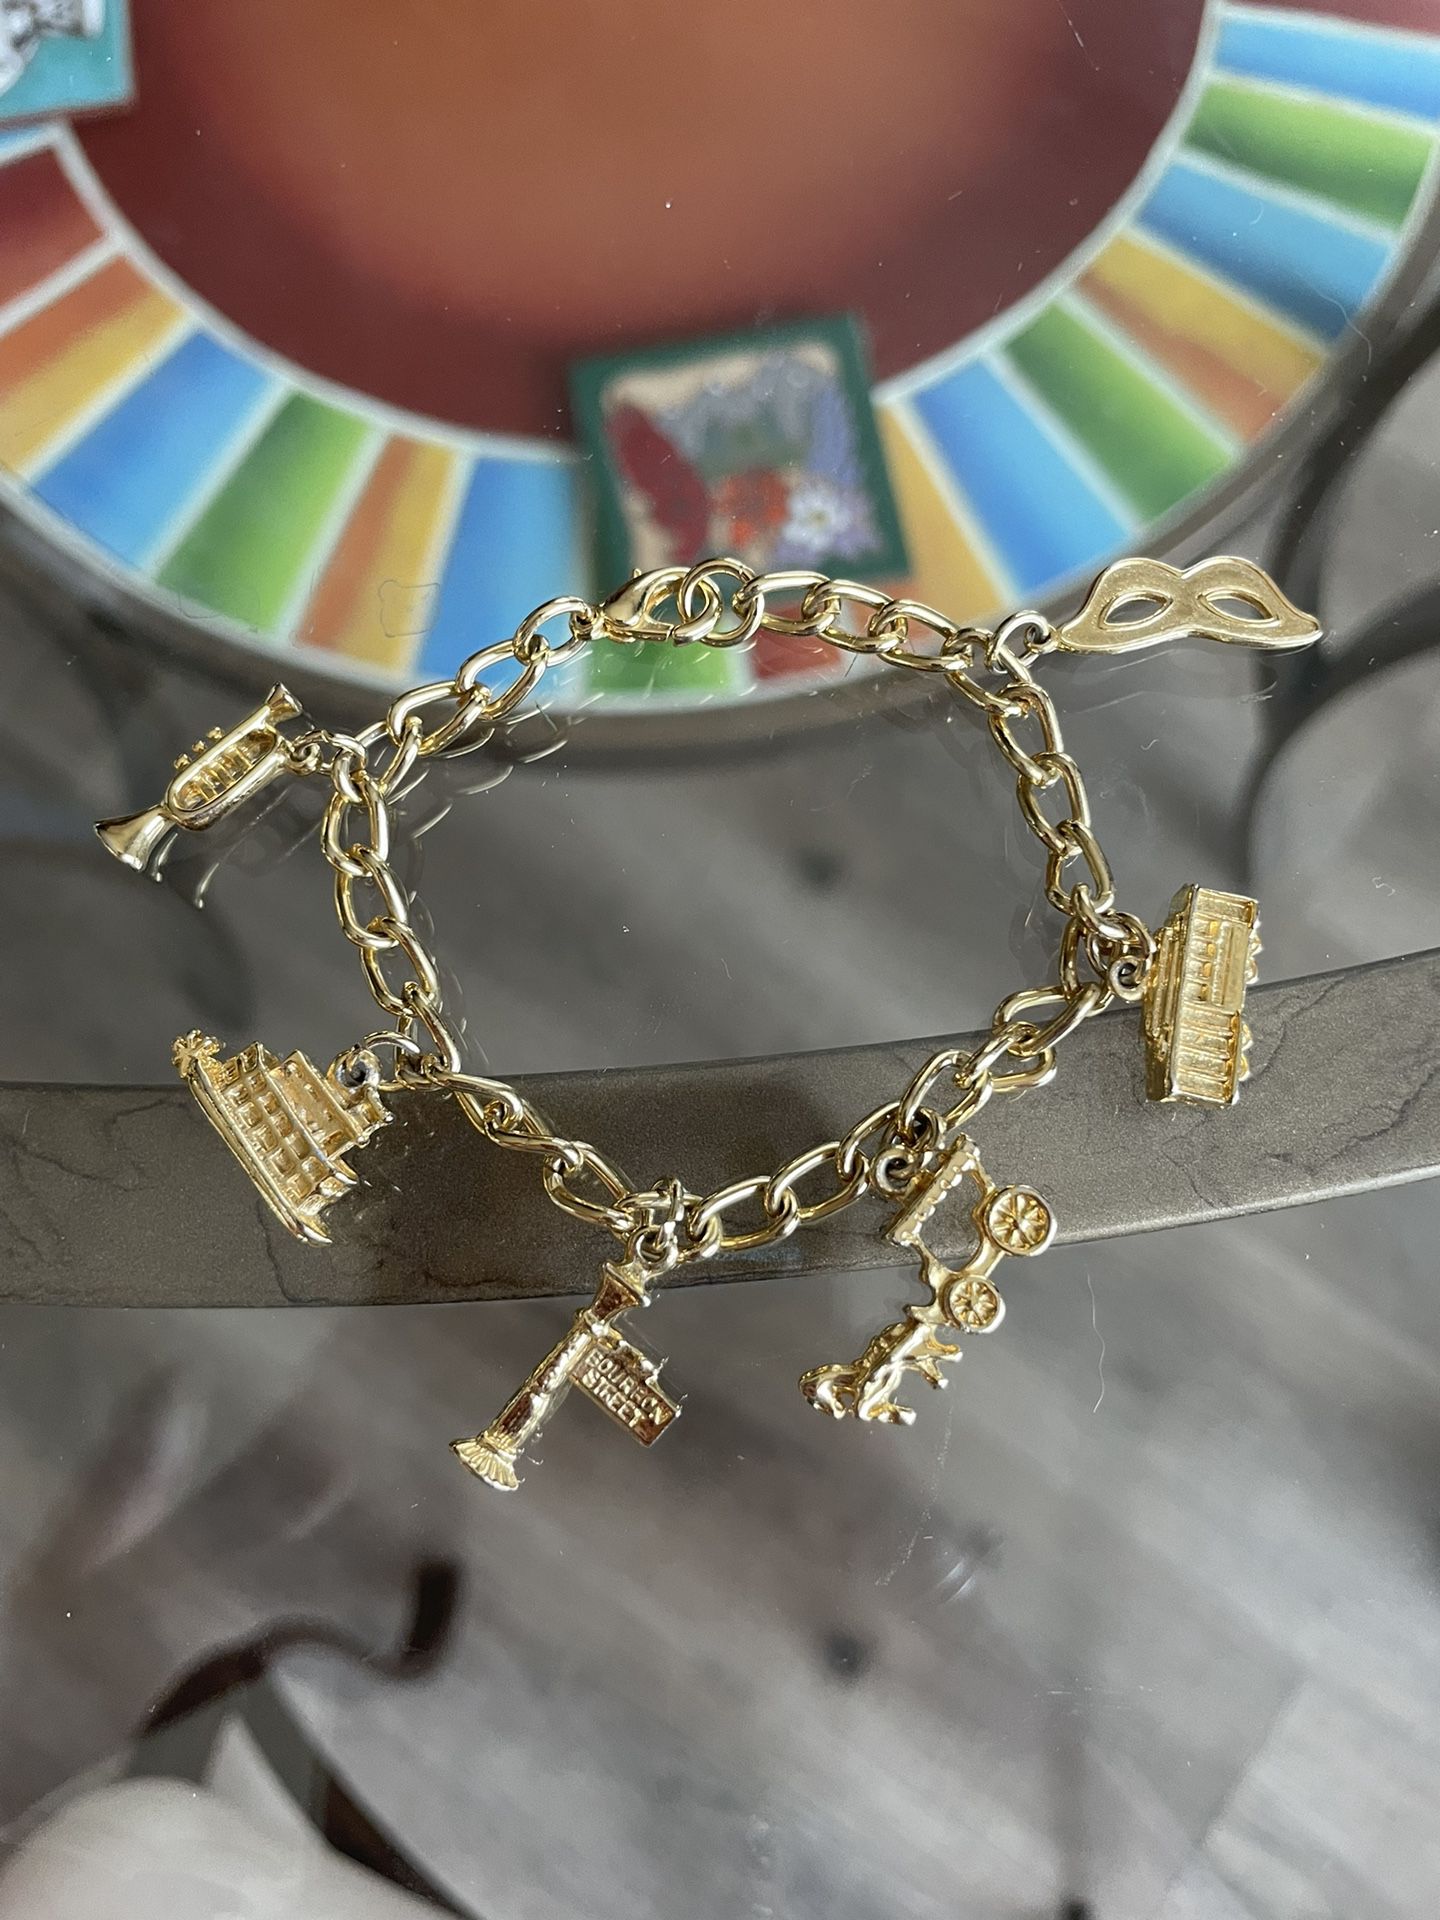 Unique Gold Louisiana-themed Bracelet for Sale in Friendswood, TX - OfferUp